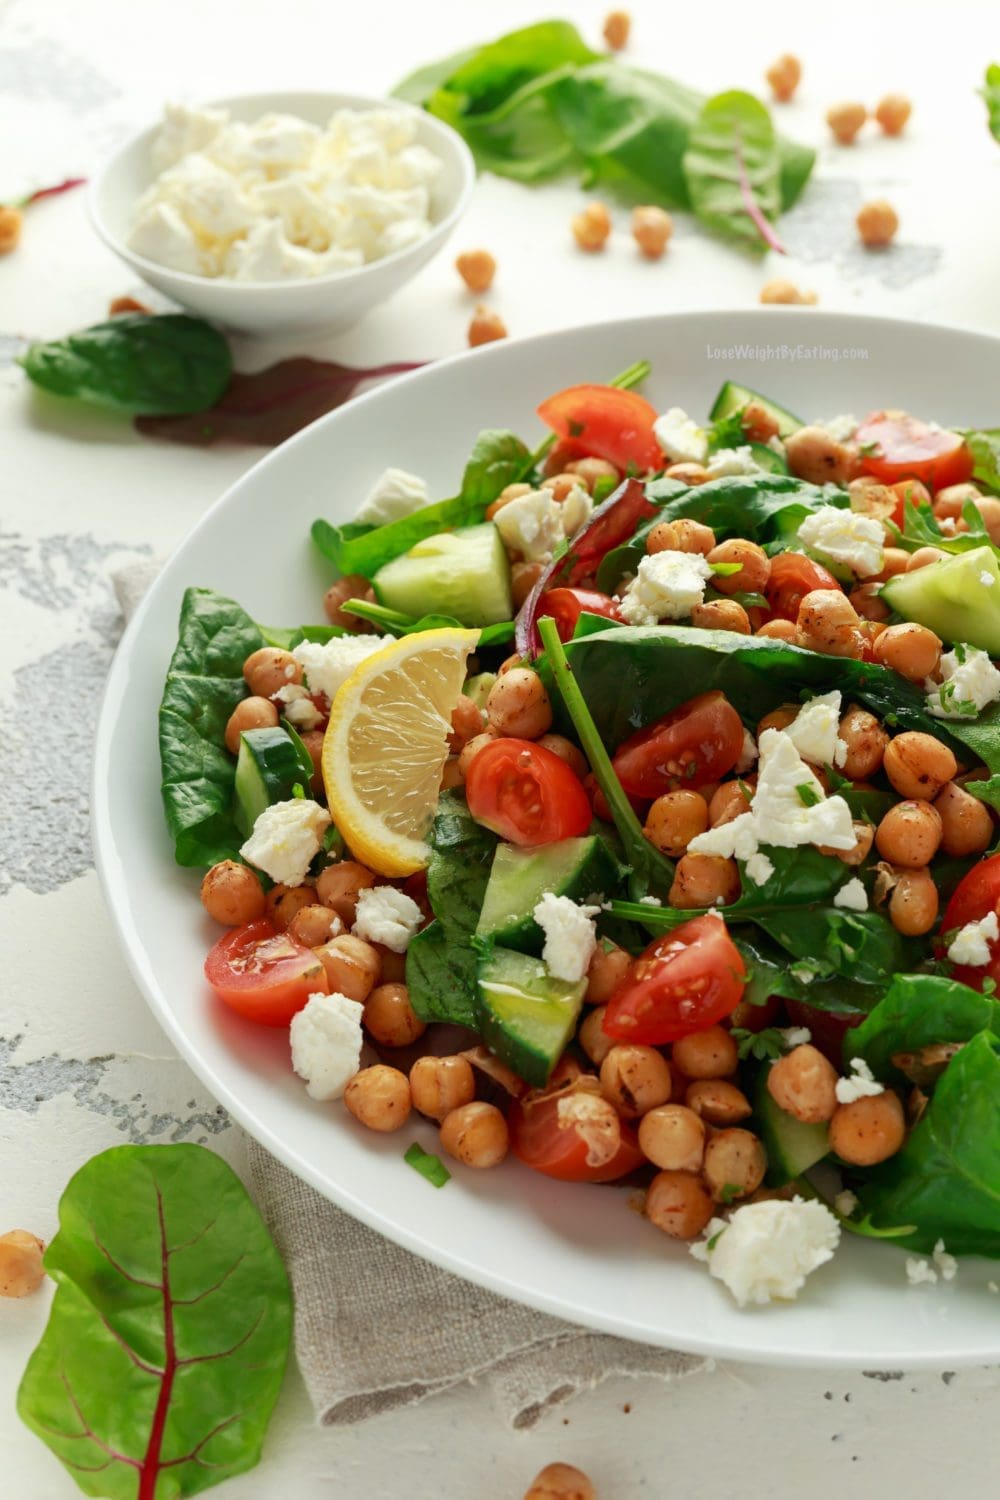 Healthy Recipe for Chickpea Salad